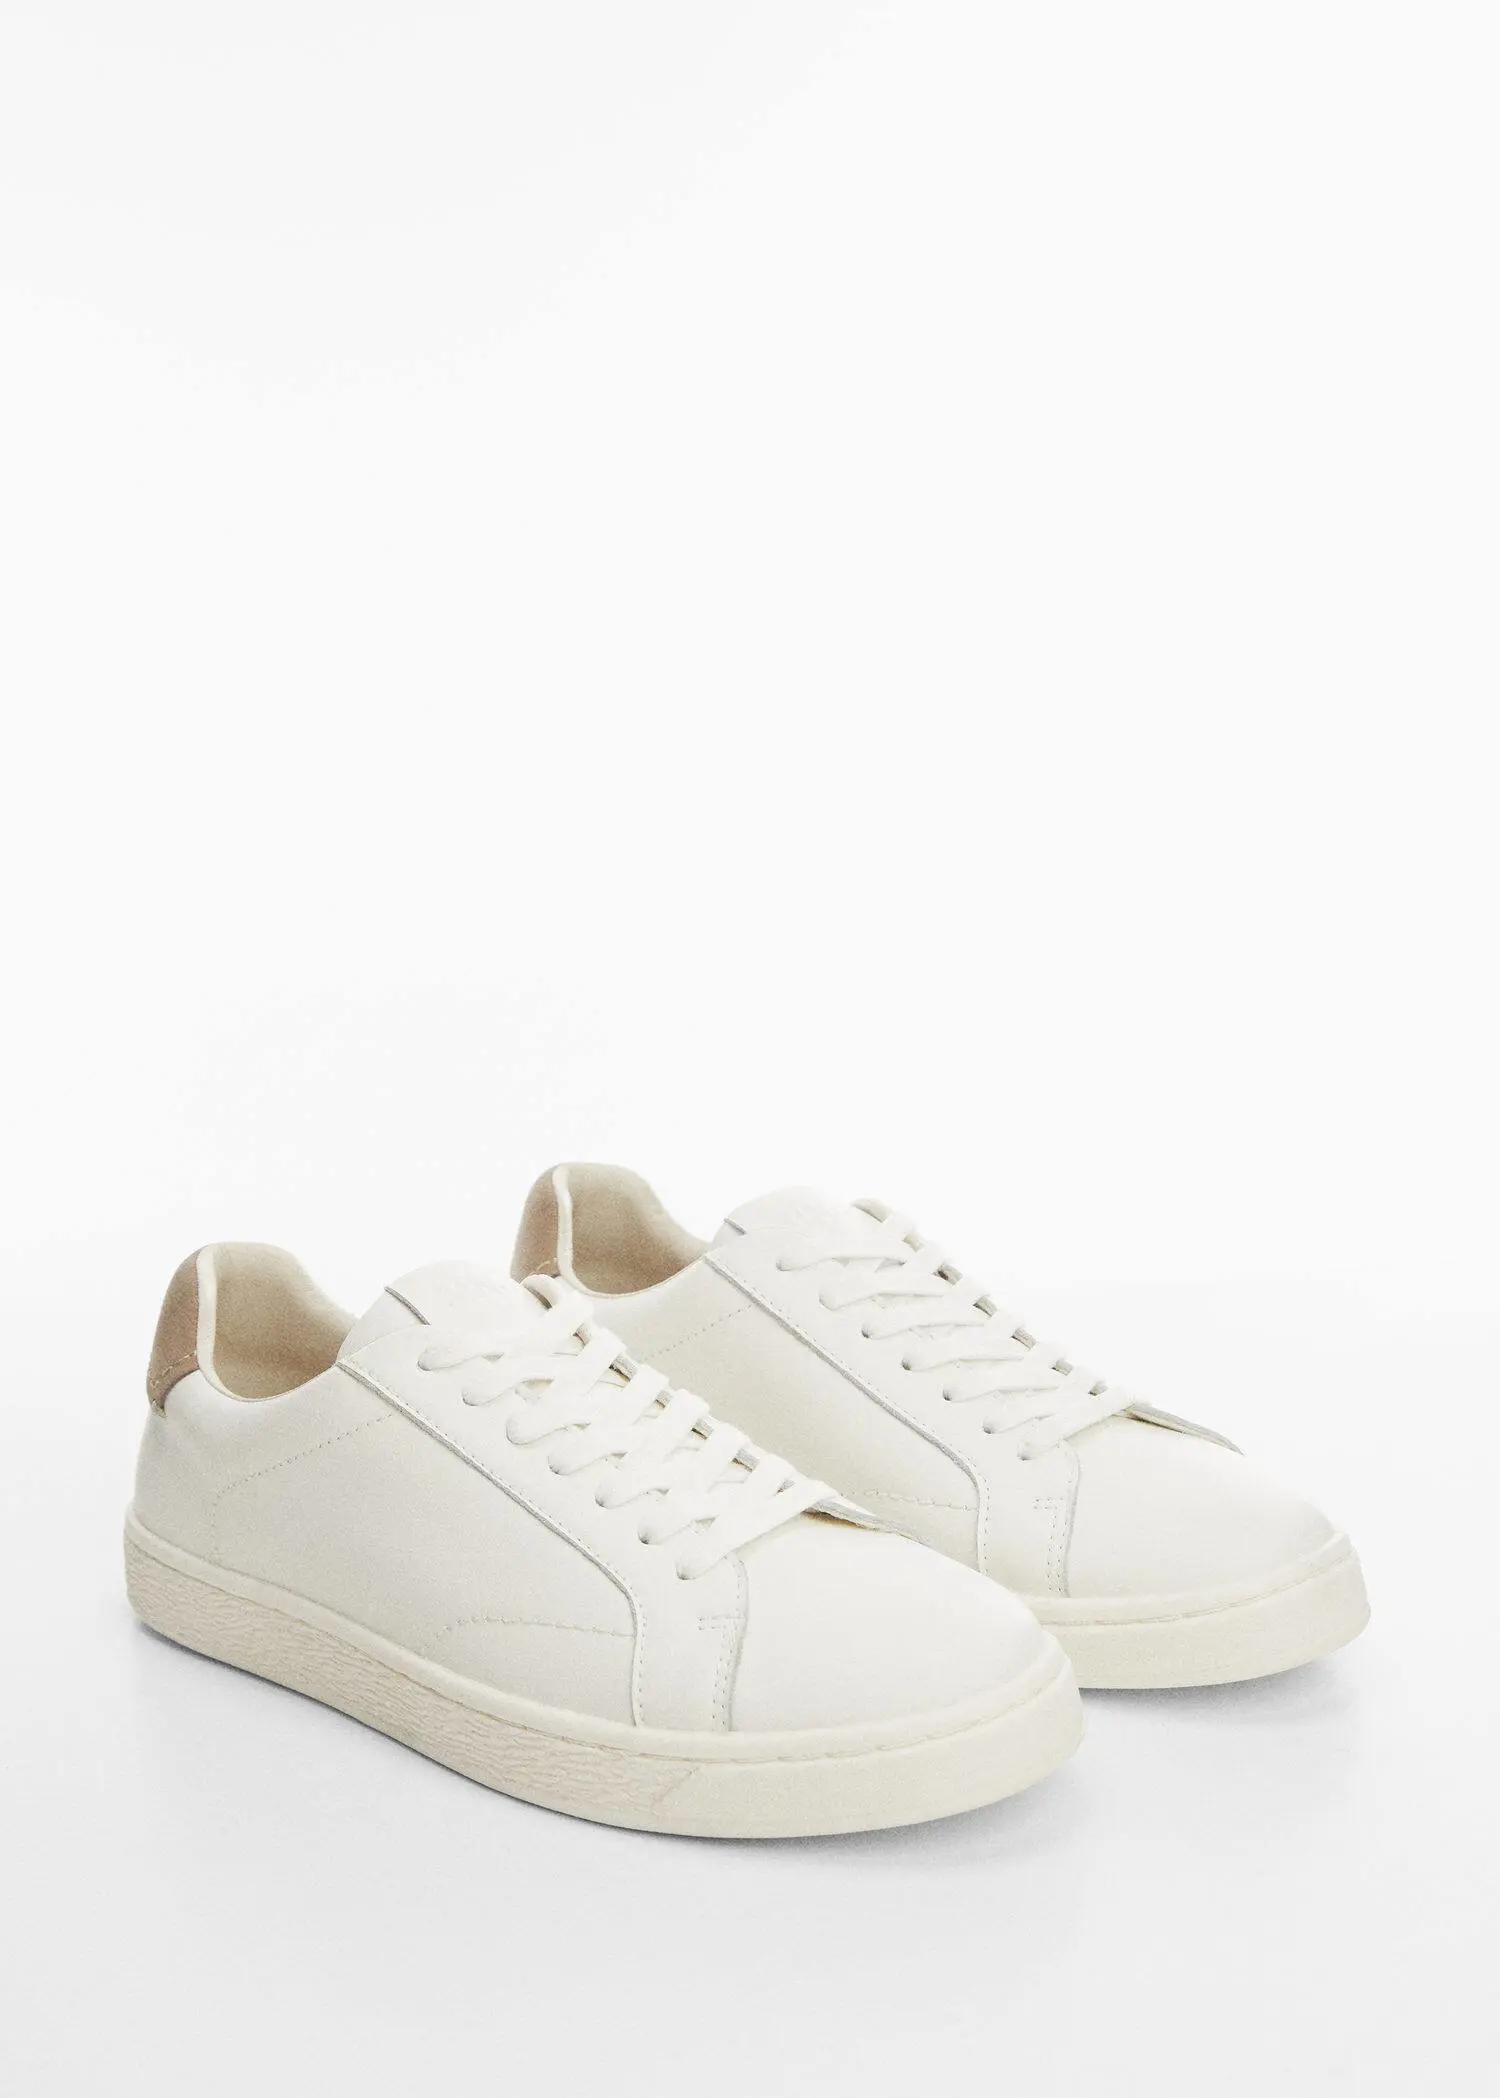 Mango Contrasting panel leather sneakers. 2